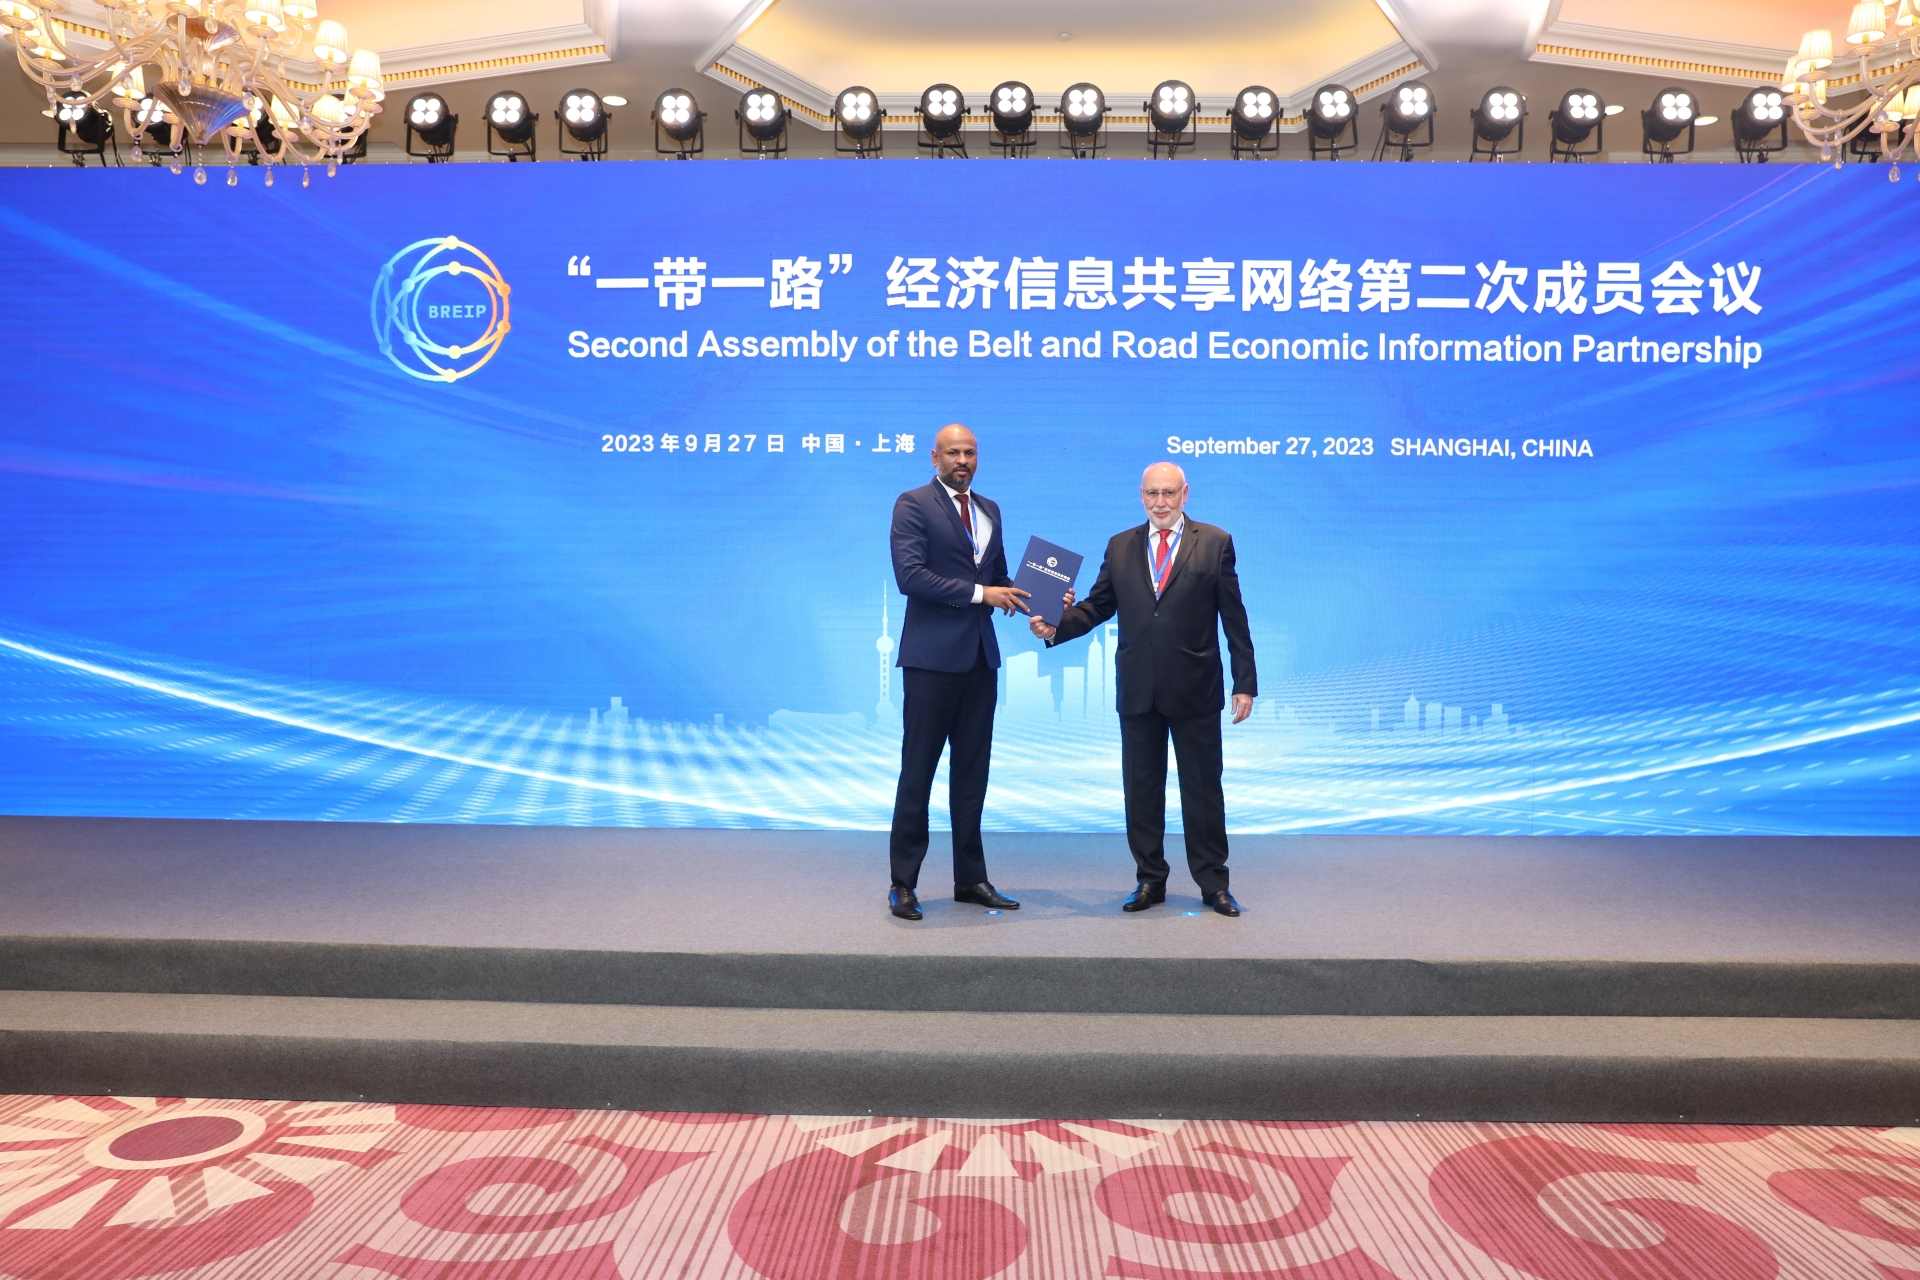 2nd Conference of the Belt and Road Economic Information Partnership